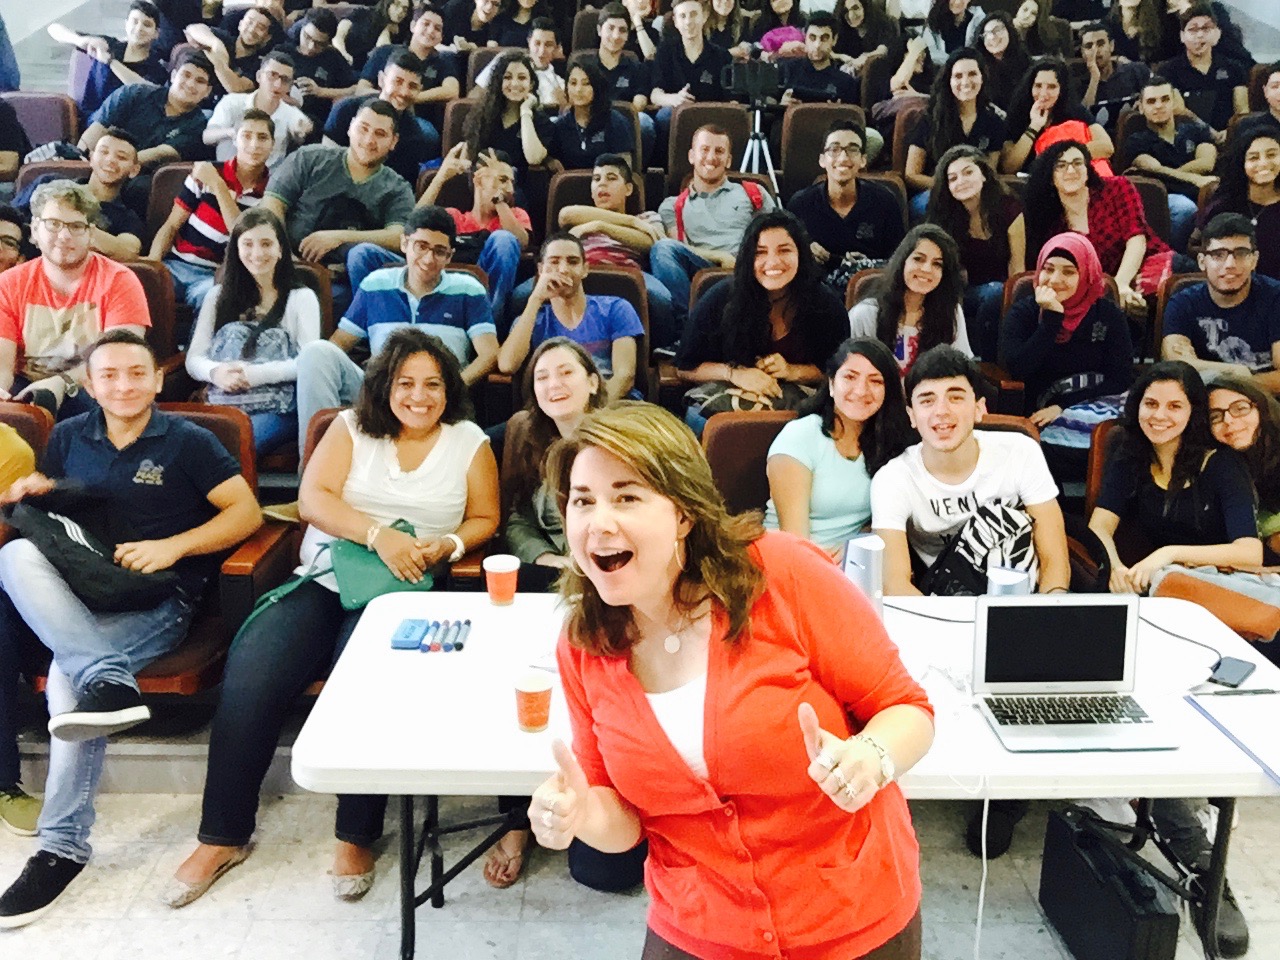 Shanna Peeples, students, and staff at an Israeli high school, Jerusalem, Israel, August 2015. Shanna shares, “This super selfie was taken during my first international trip as an ambassador of U.S. education. The State Department arranged my two-week visit to several countries in the Middle East.” Photo courtesy of Shanna Peeples.